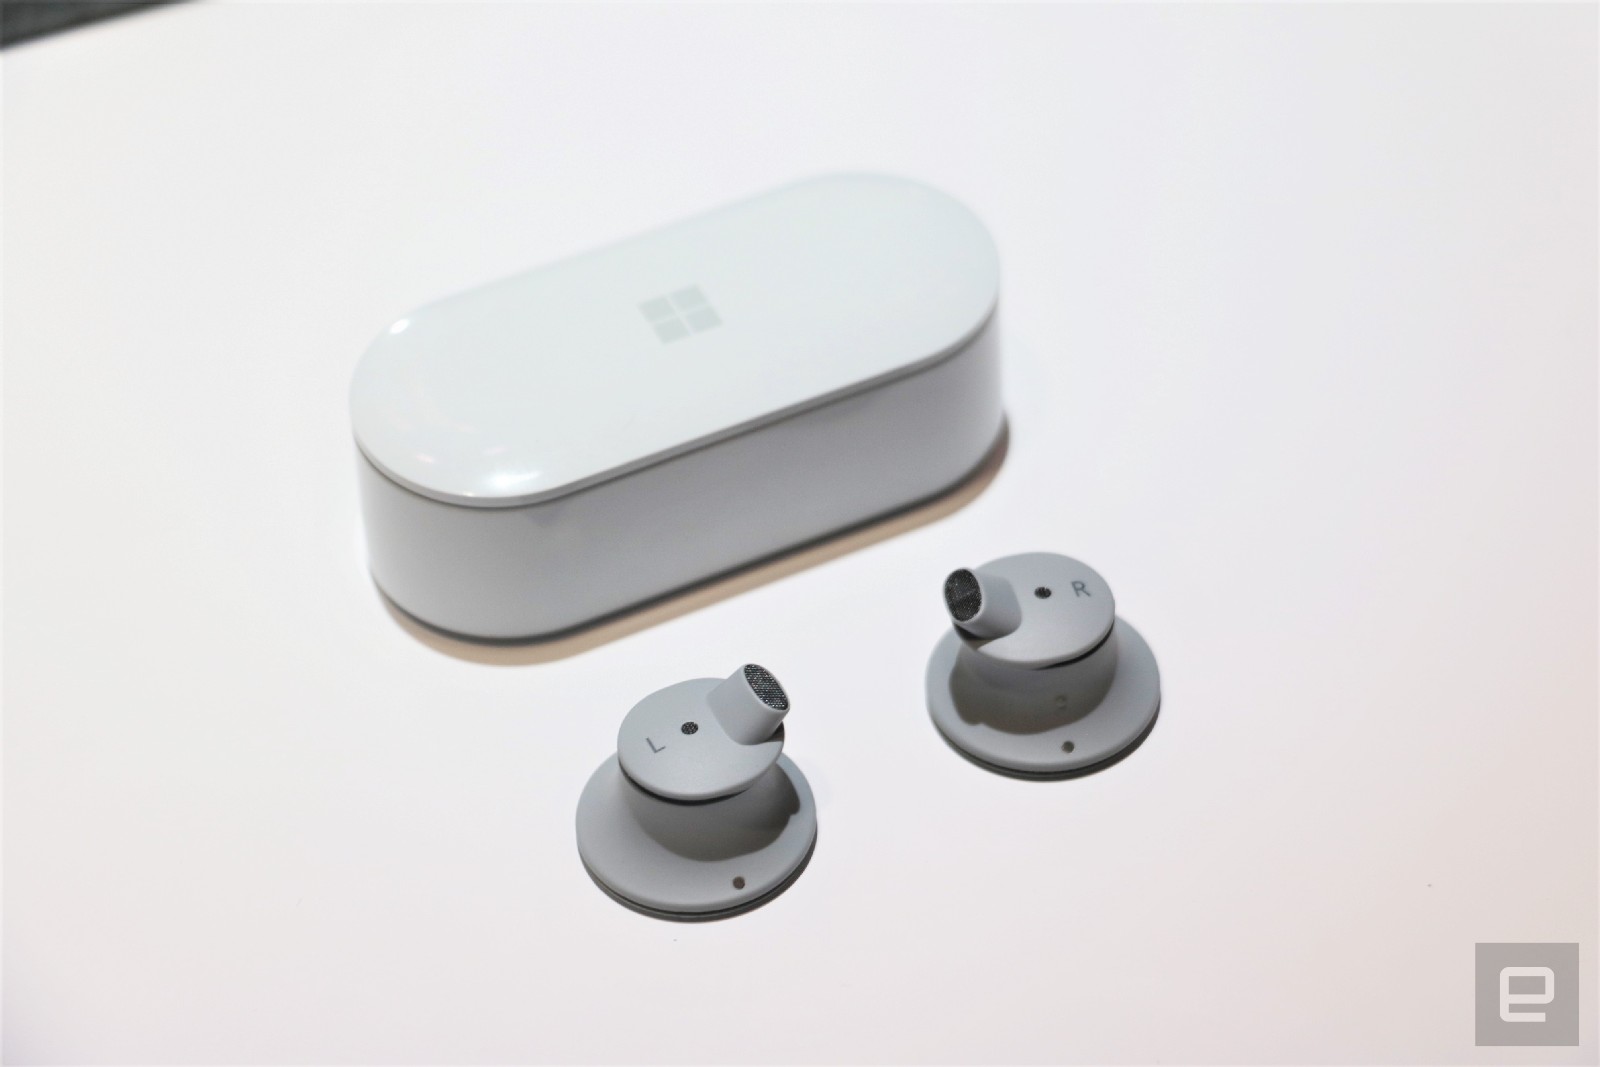 Surface Earbuds via Engadget